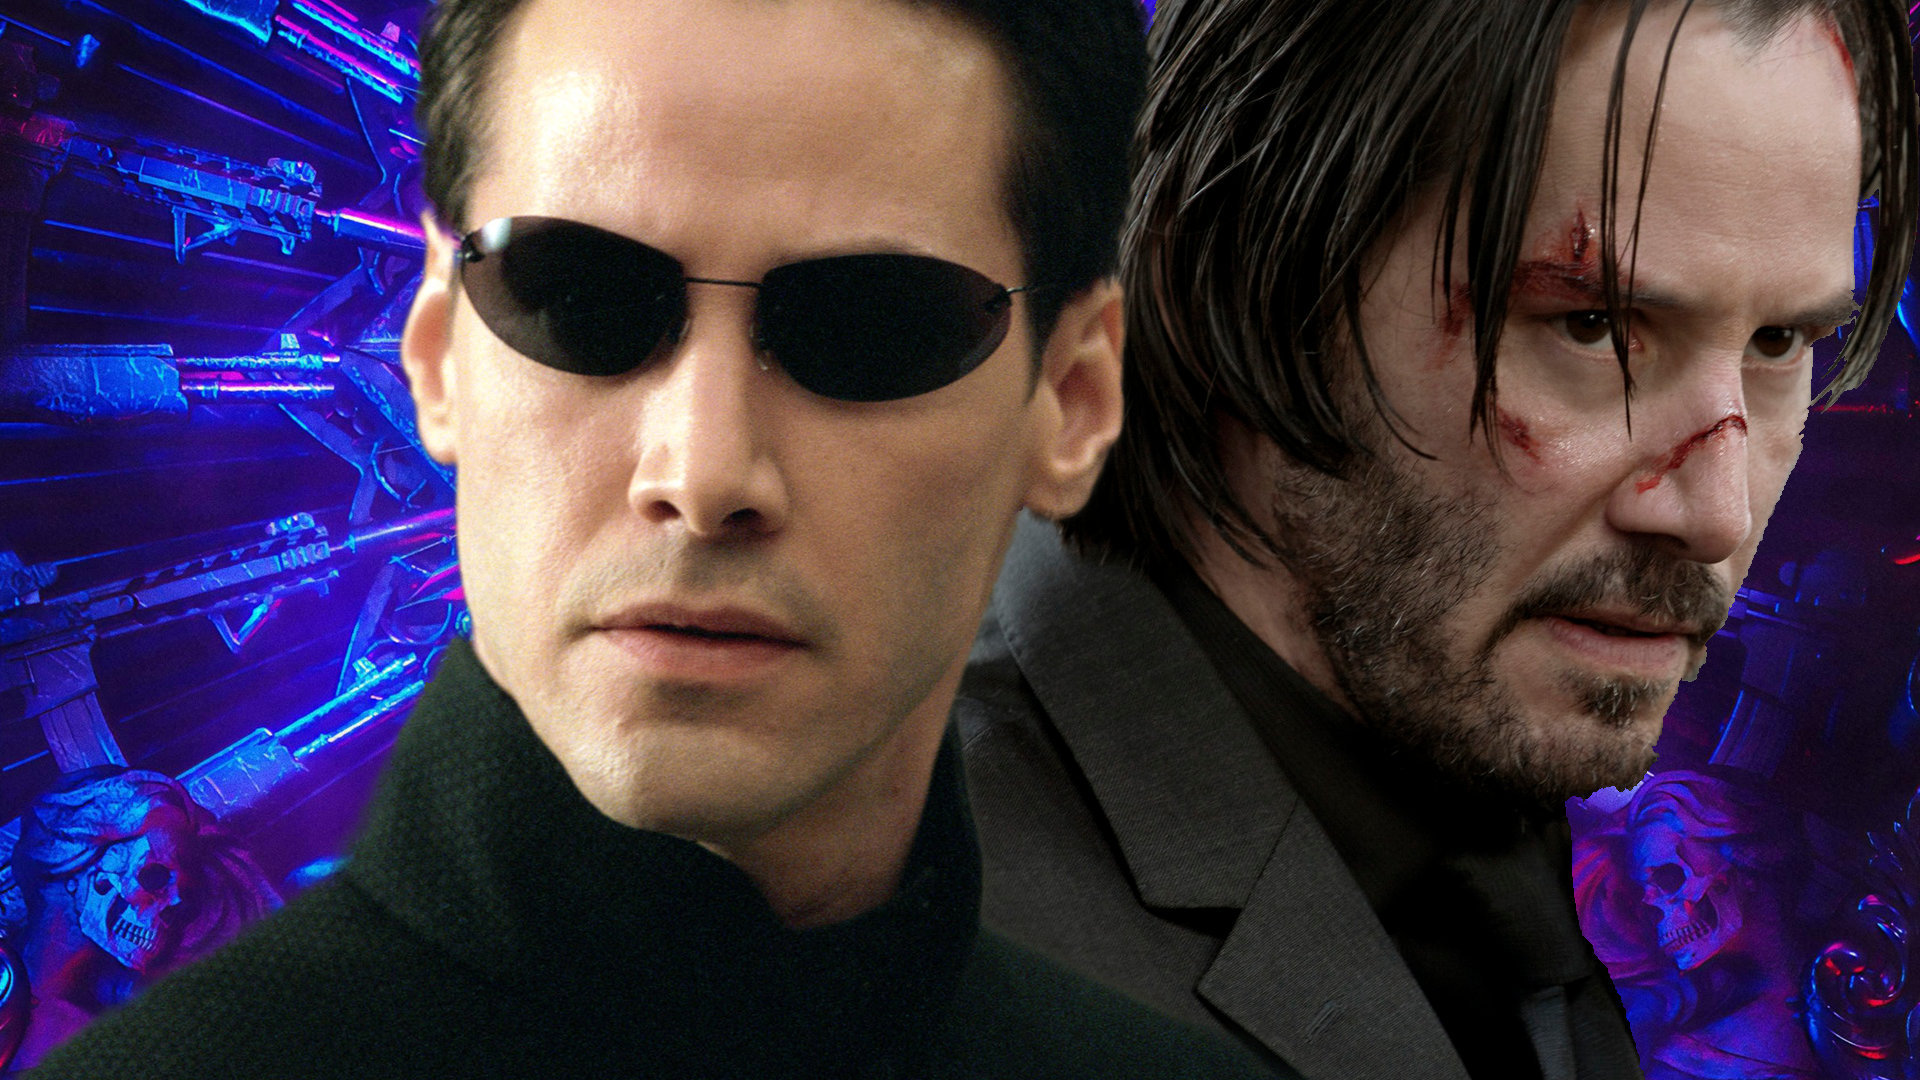 Matrix 4 Starring Keanu Reeves and CarrieAnne Moss Announced  Pitchfork